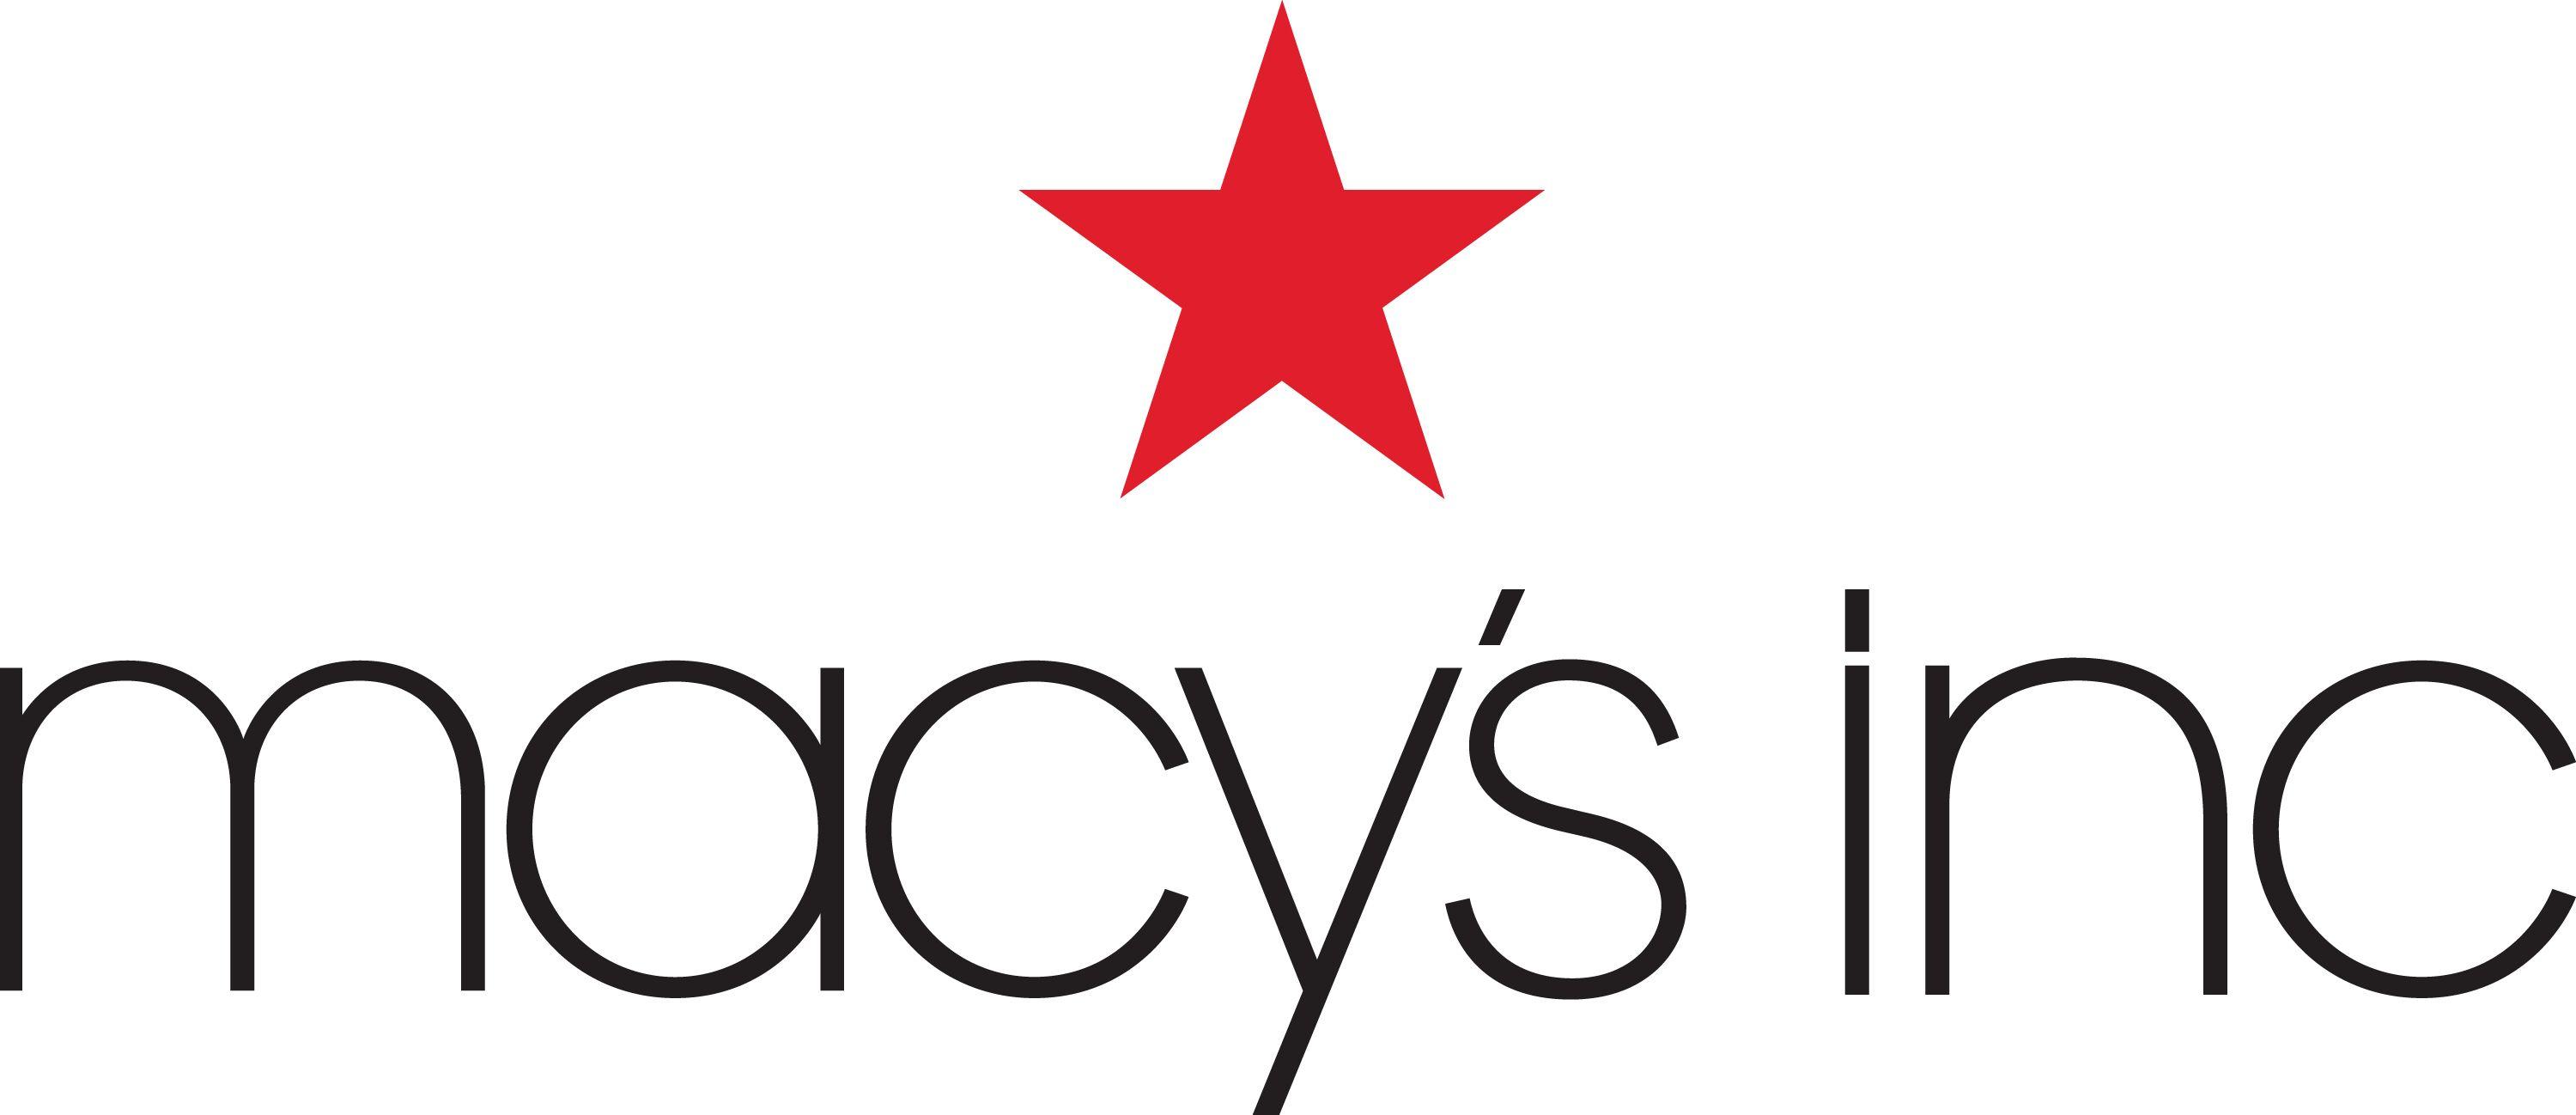 Macy's White Star Logo - David Abney Joins Macy's, Inc. Board of Directors | Business Wire